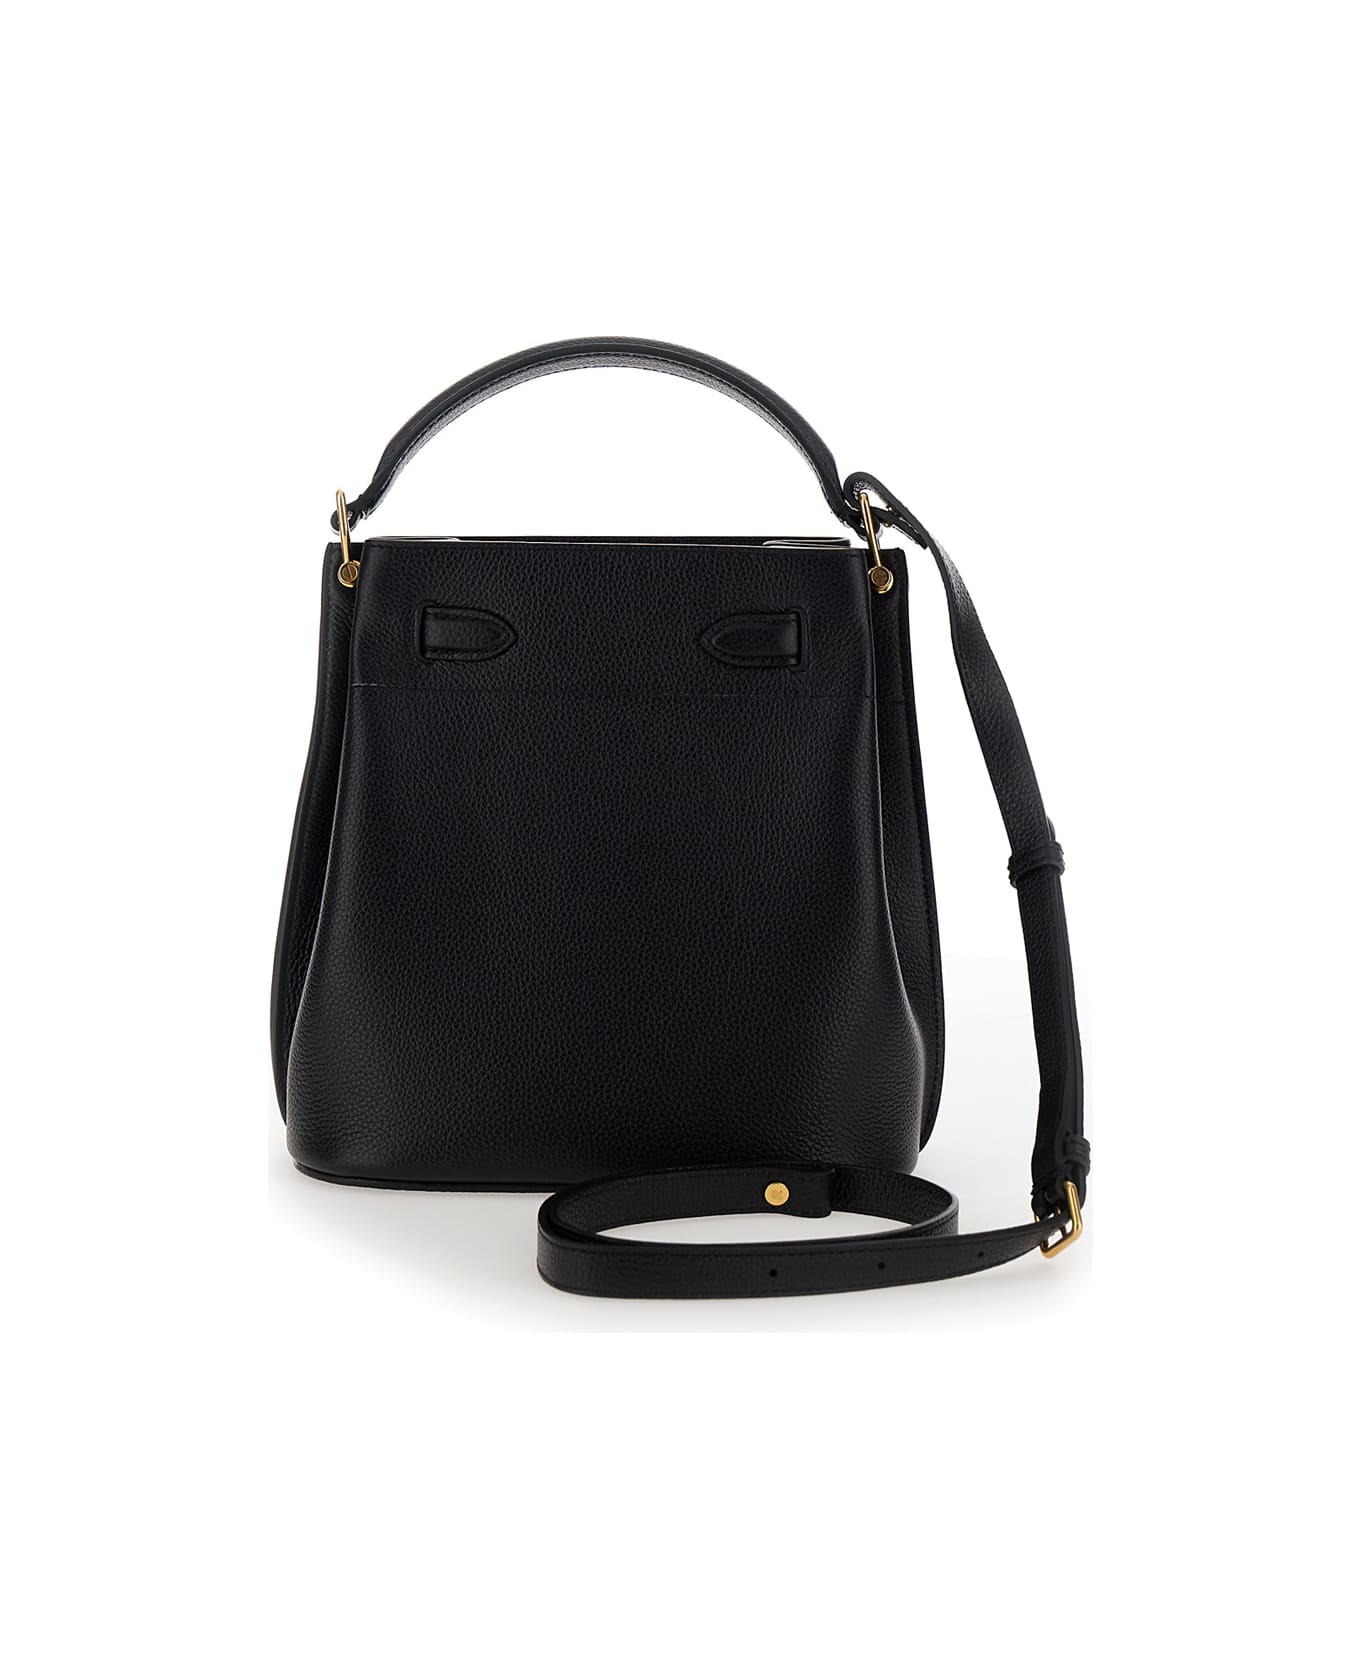 Mulberry 'small Islington' Black Bucket Bag With Twist Lock Closure In Hammered Leather Woman - Black